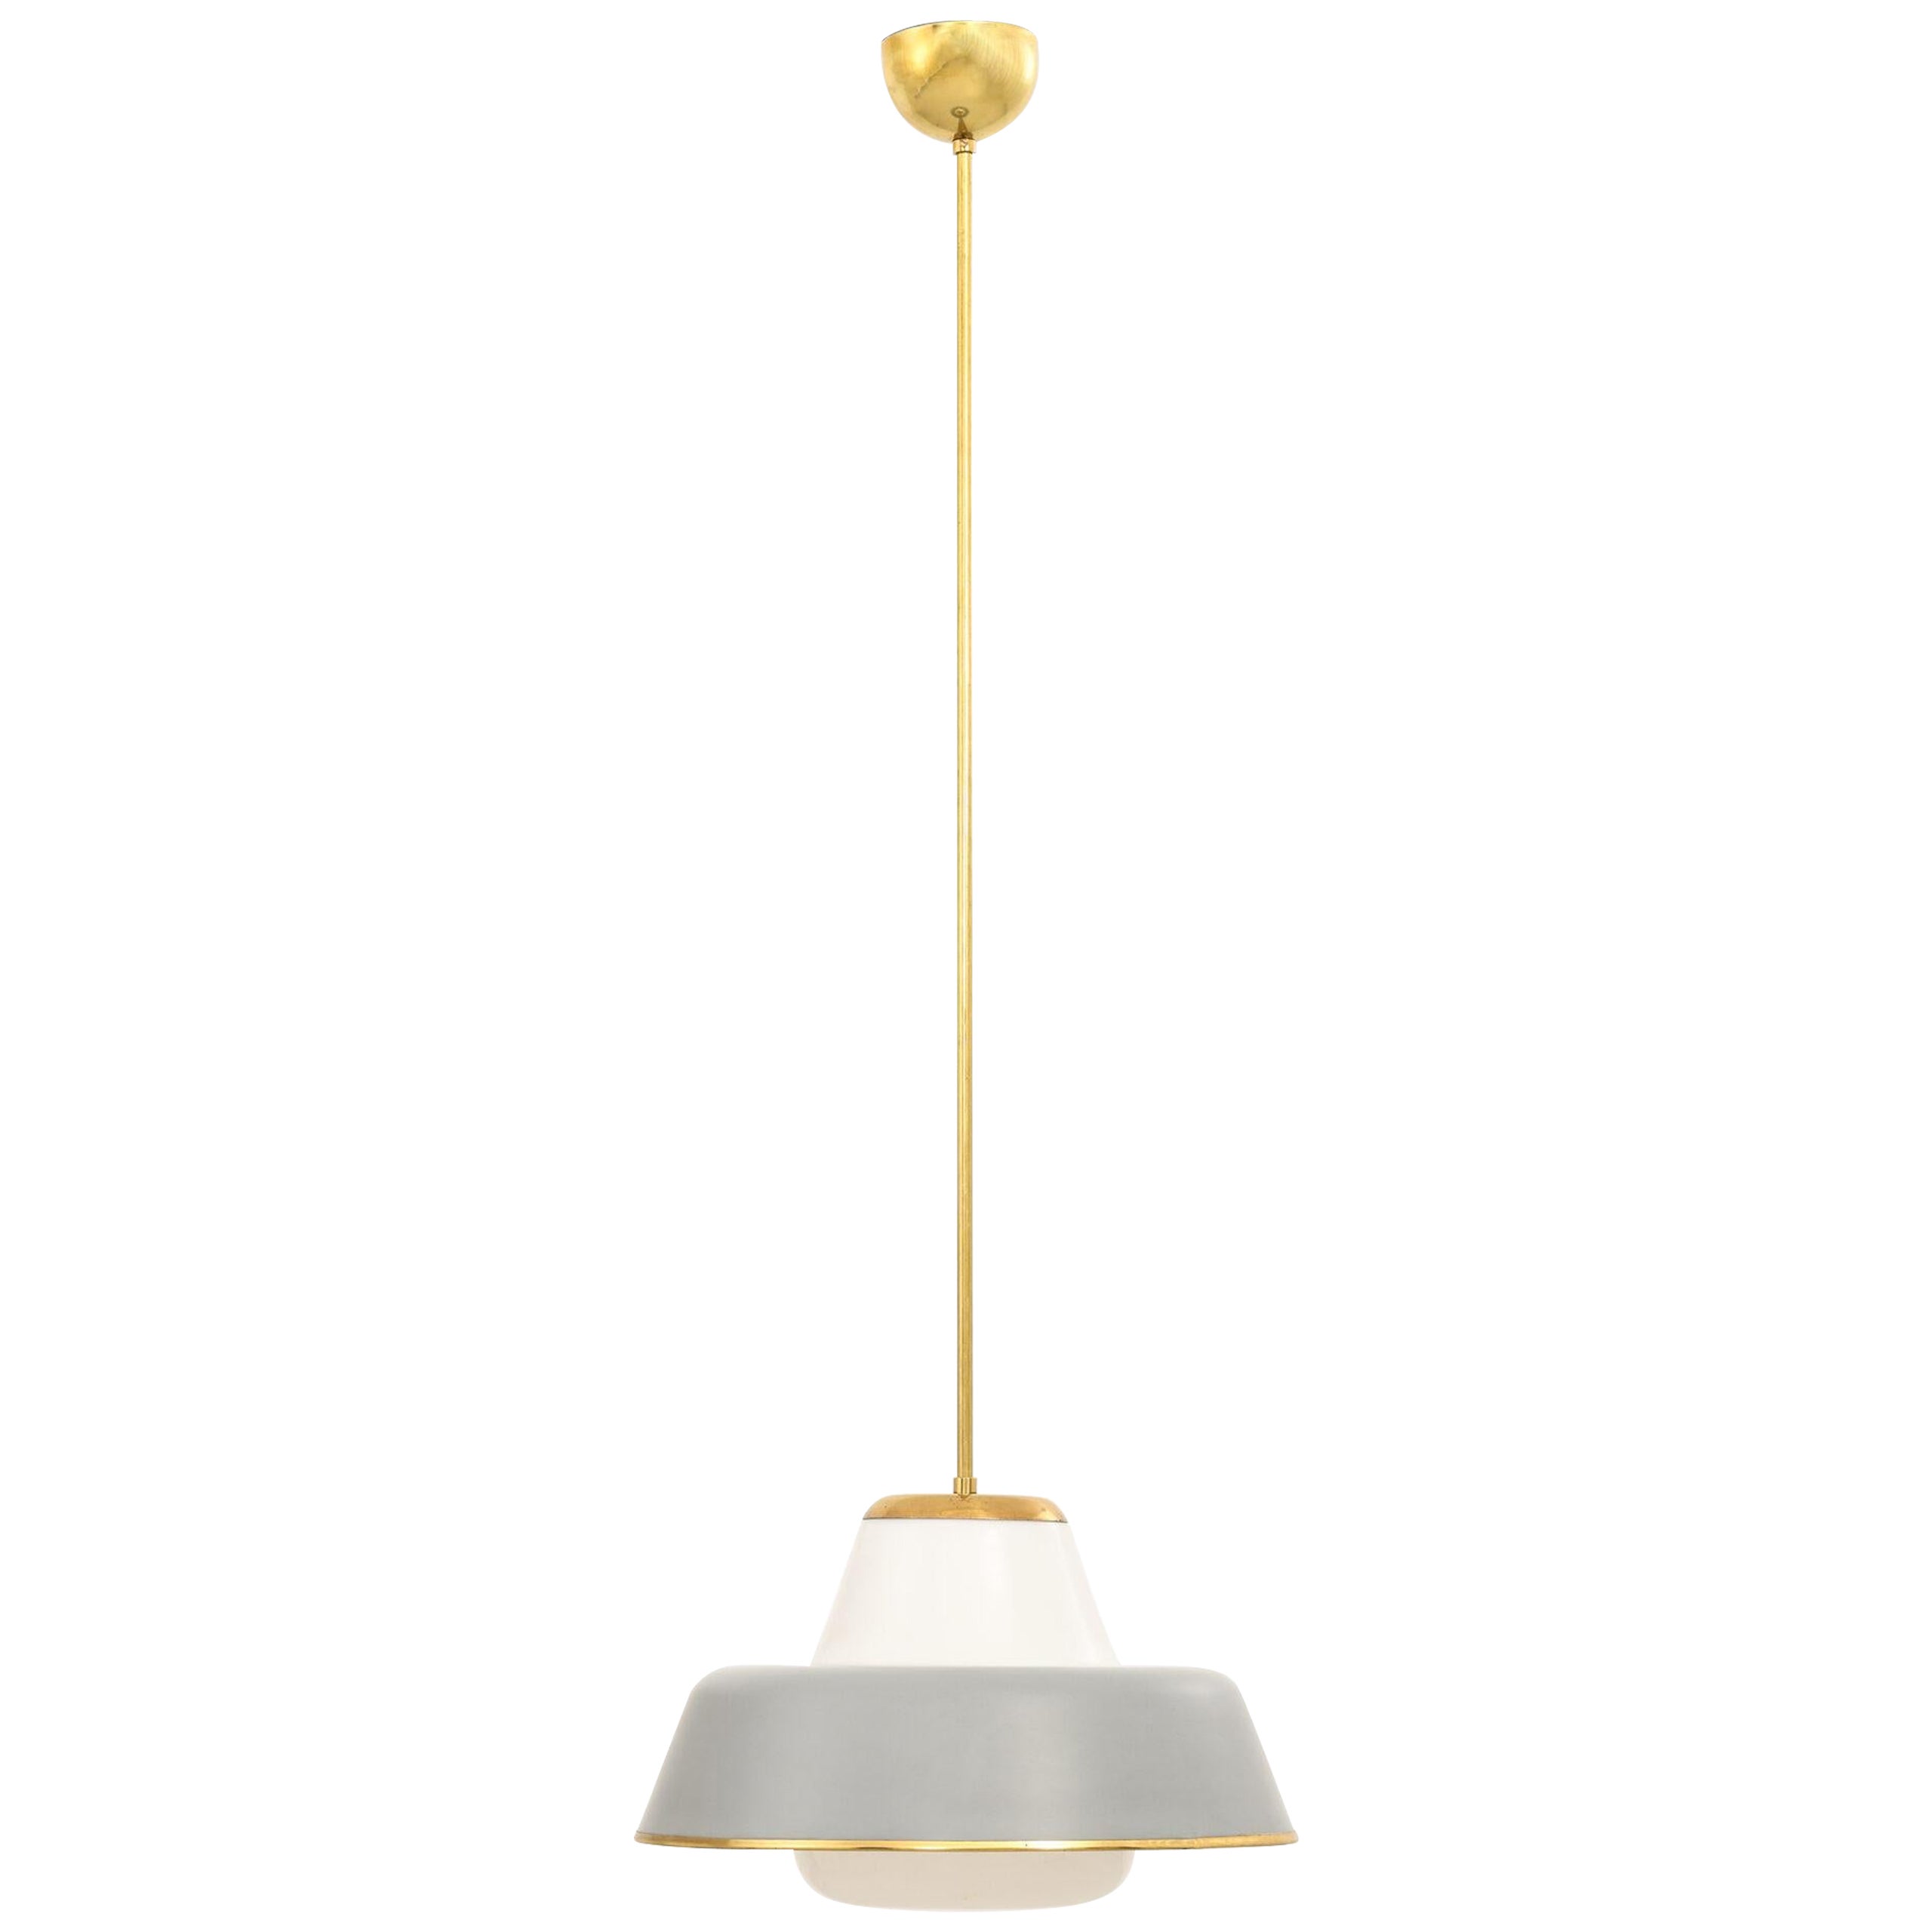 Lisa Johansson-Pape Ceiling Lamps Model 61-347 Produced by Orno in Finland